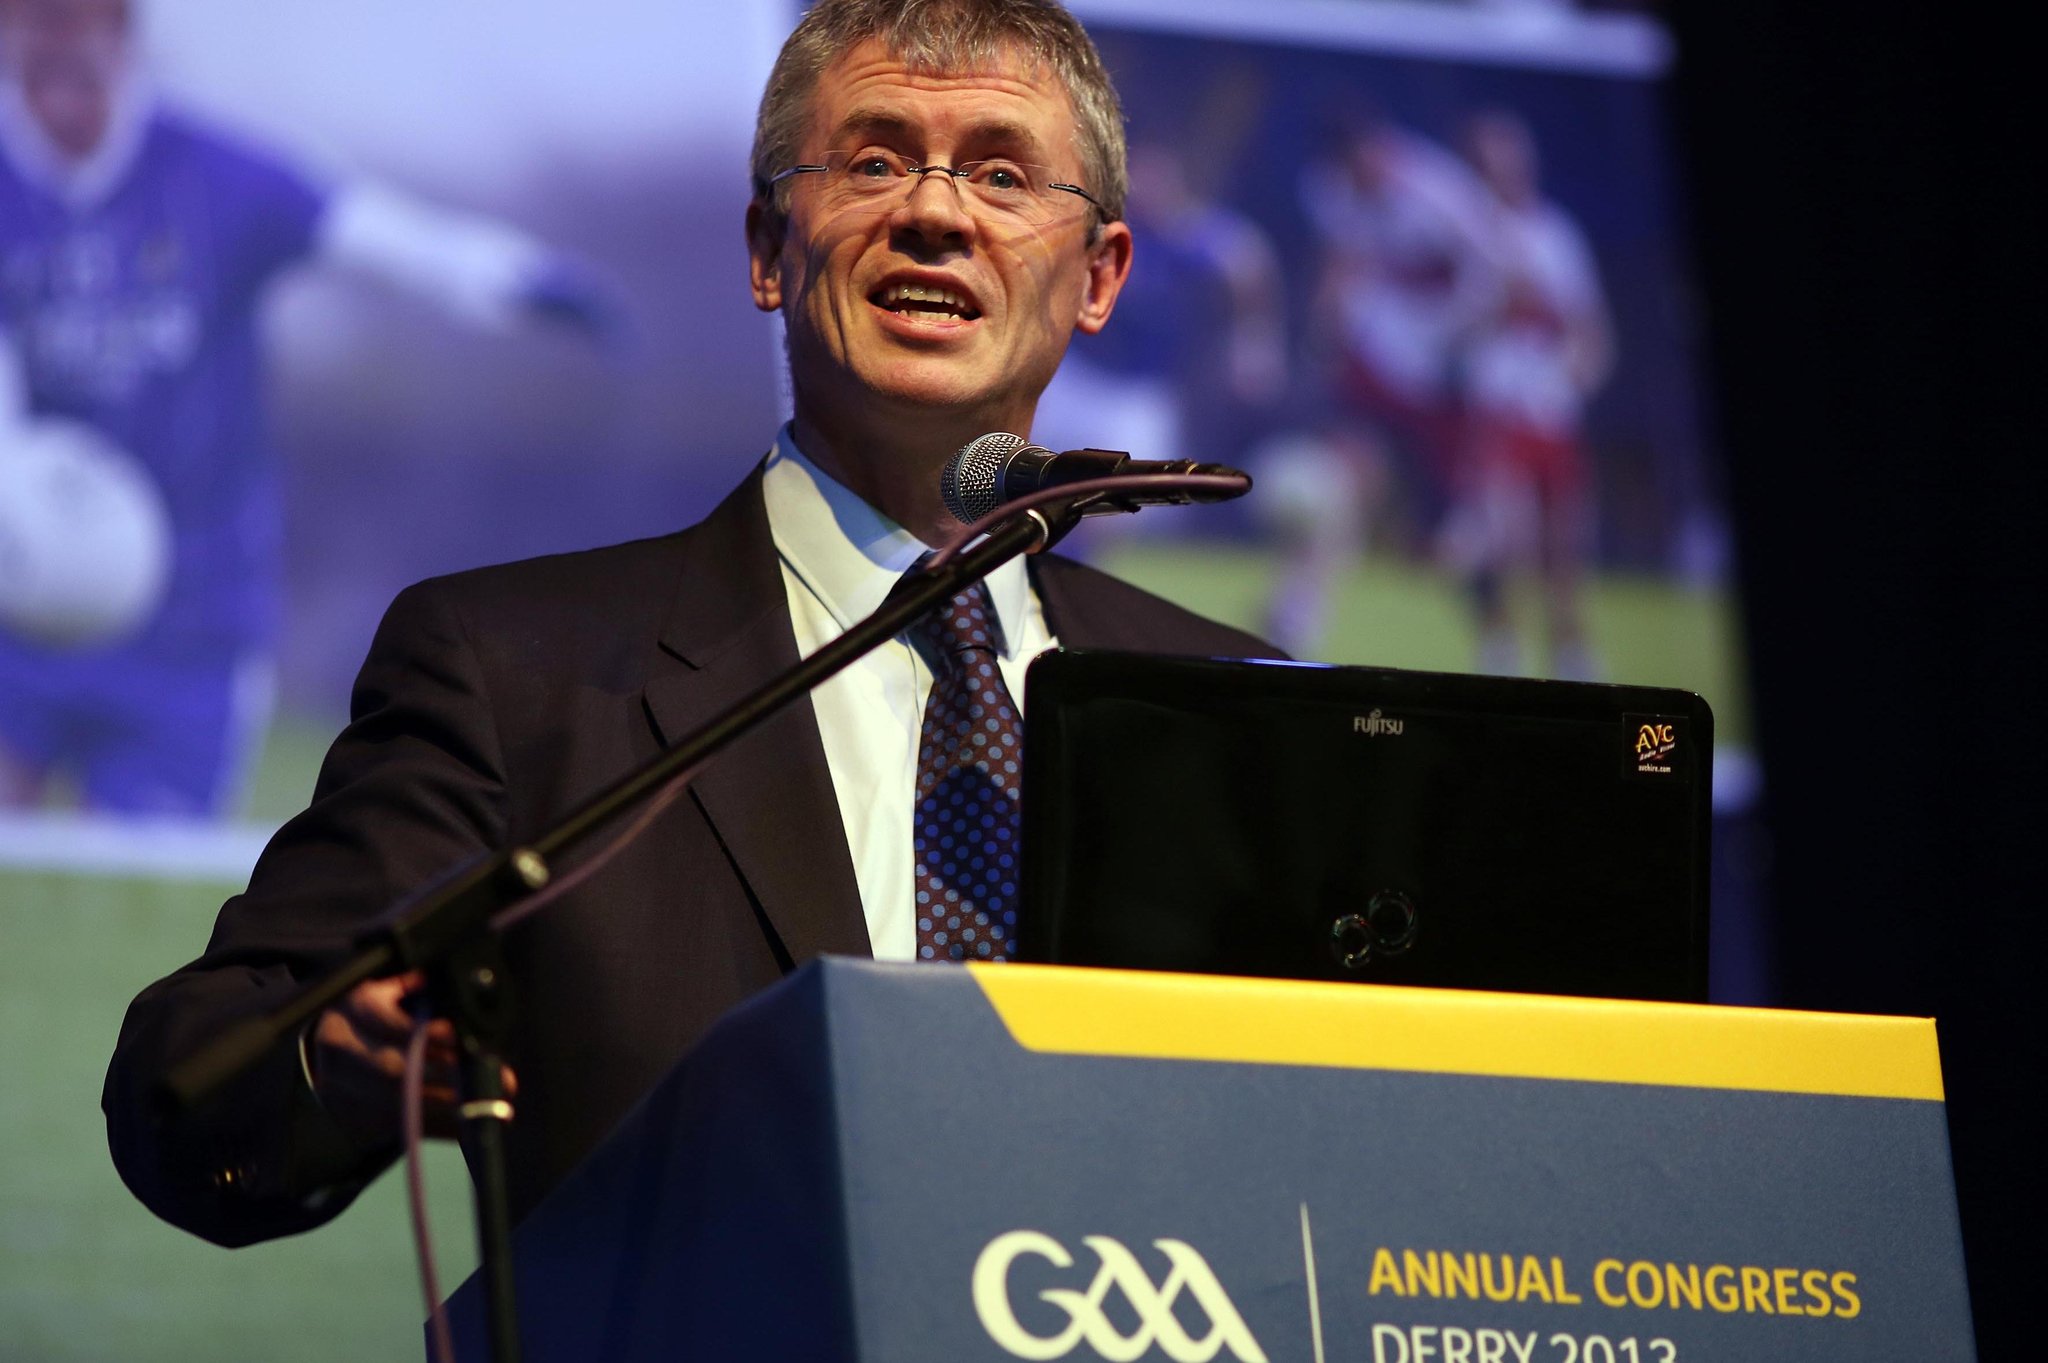 Joe Brolly's remarks are the issue, not his GAA background